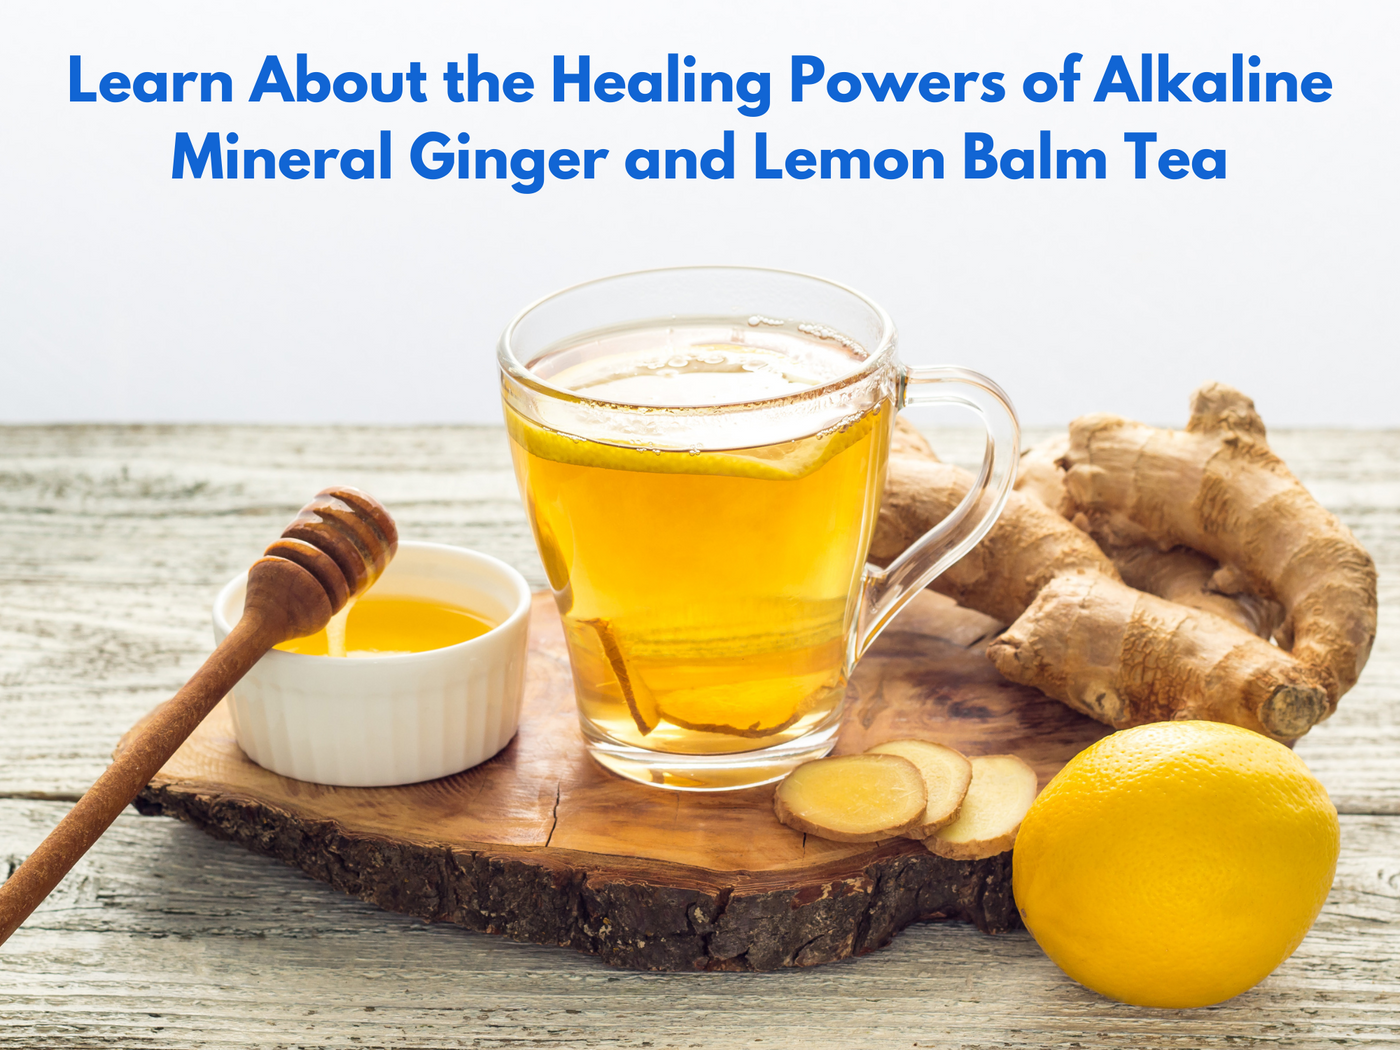 Learn about the Healing Powers of Alkaline Mineral Ginger and Lemon Balm Tea